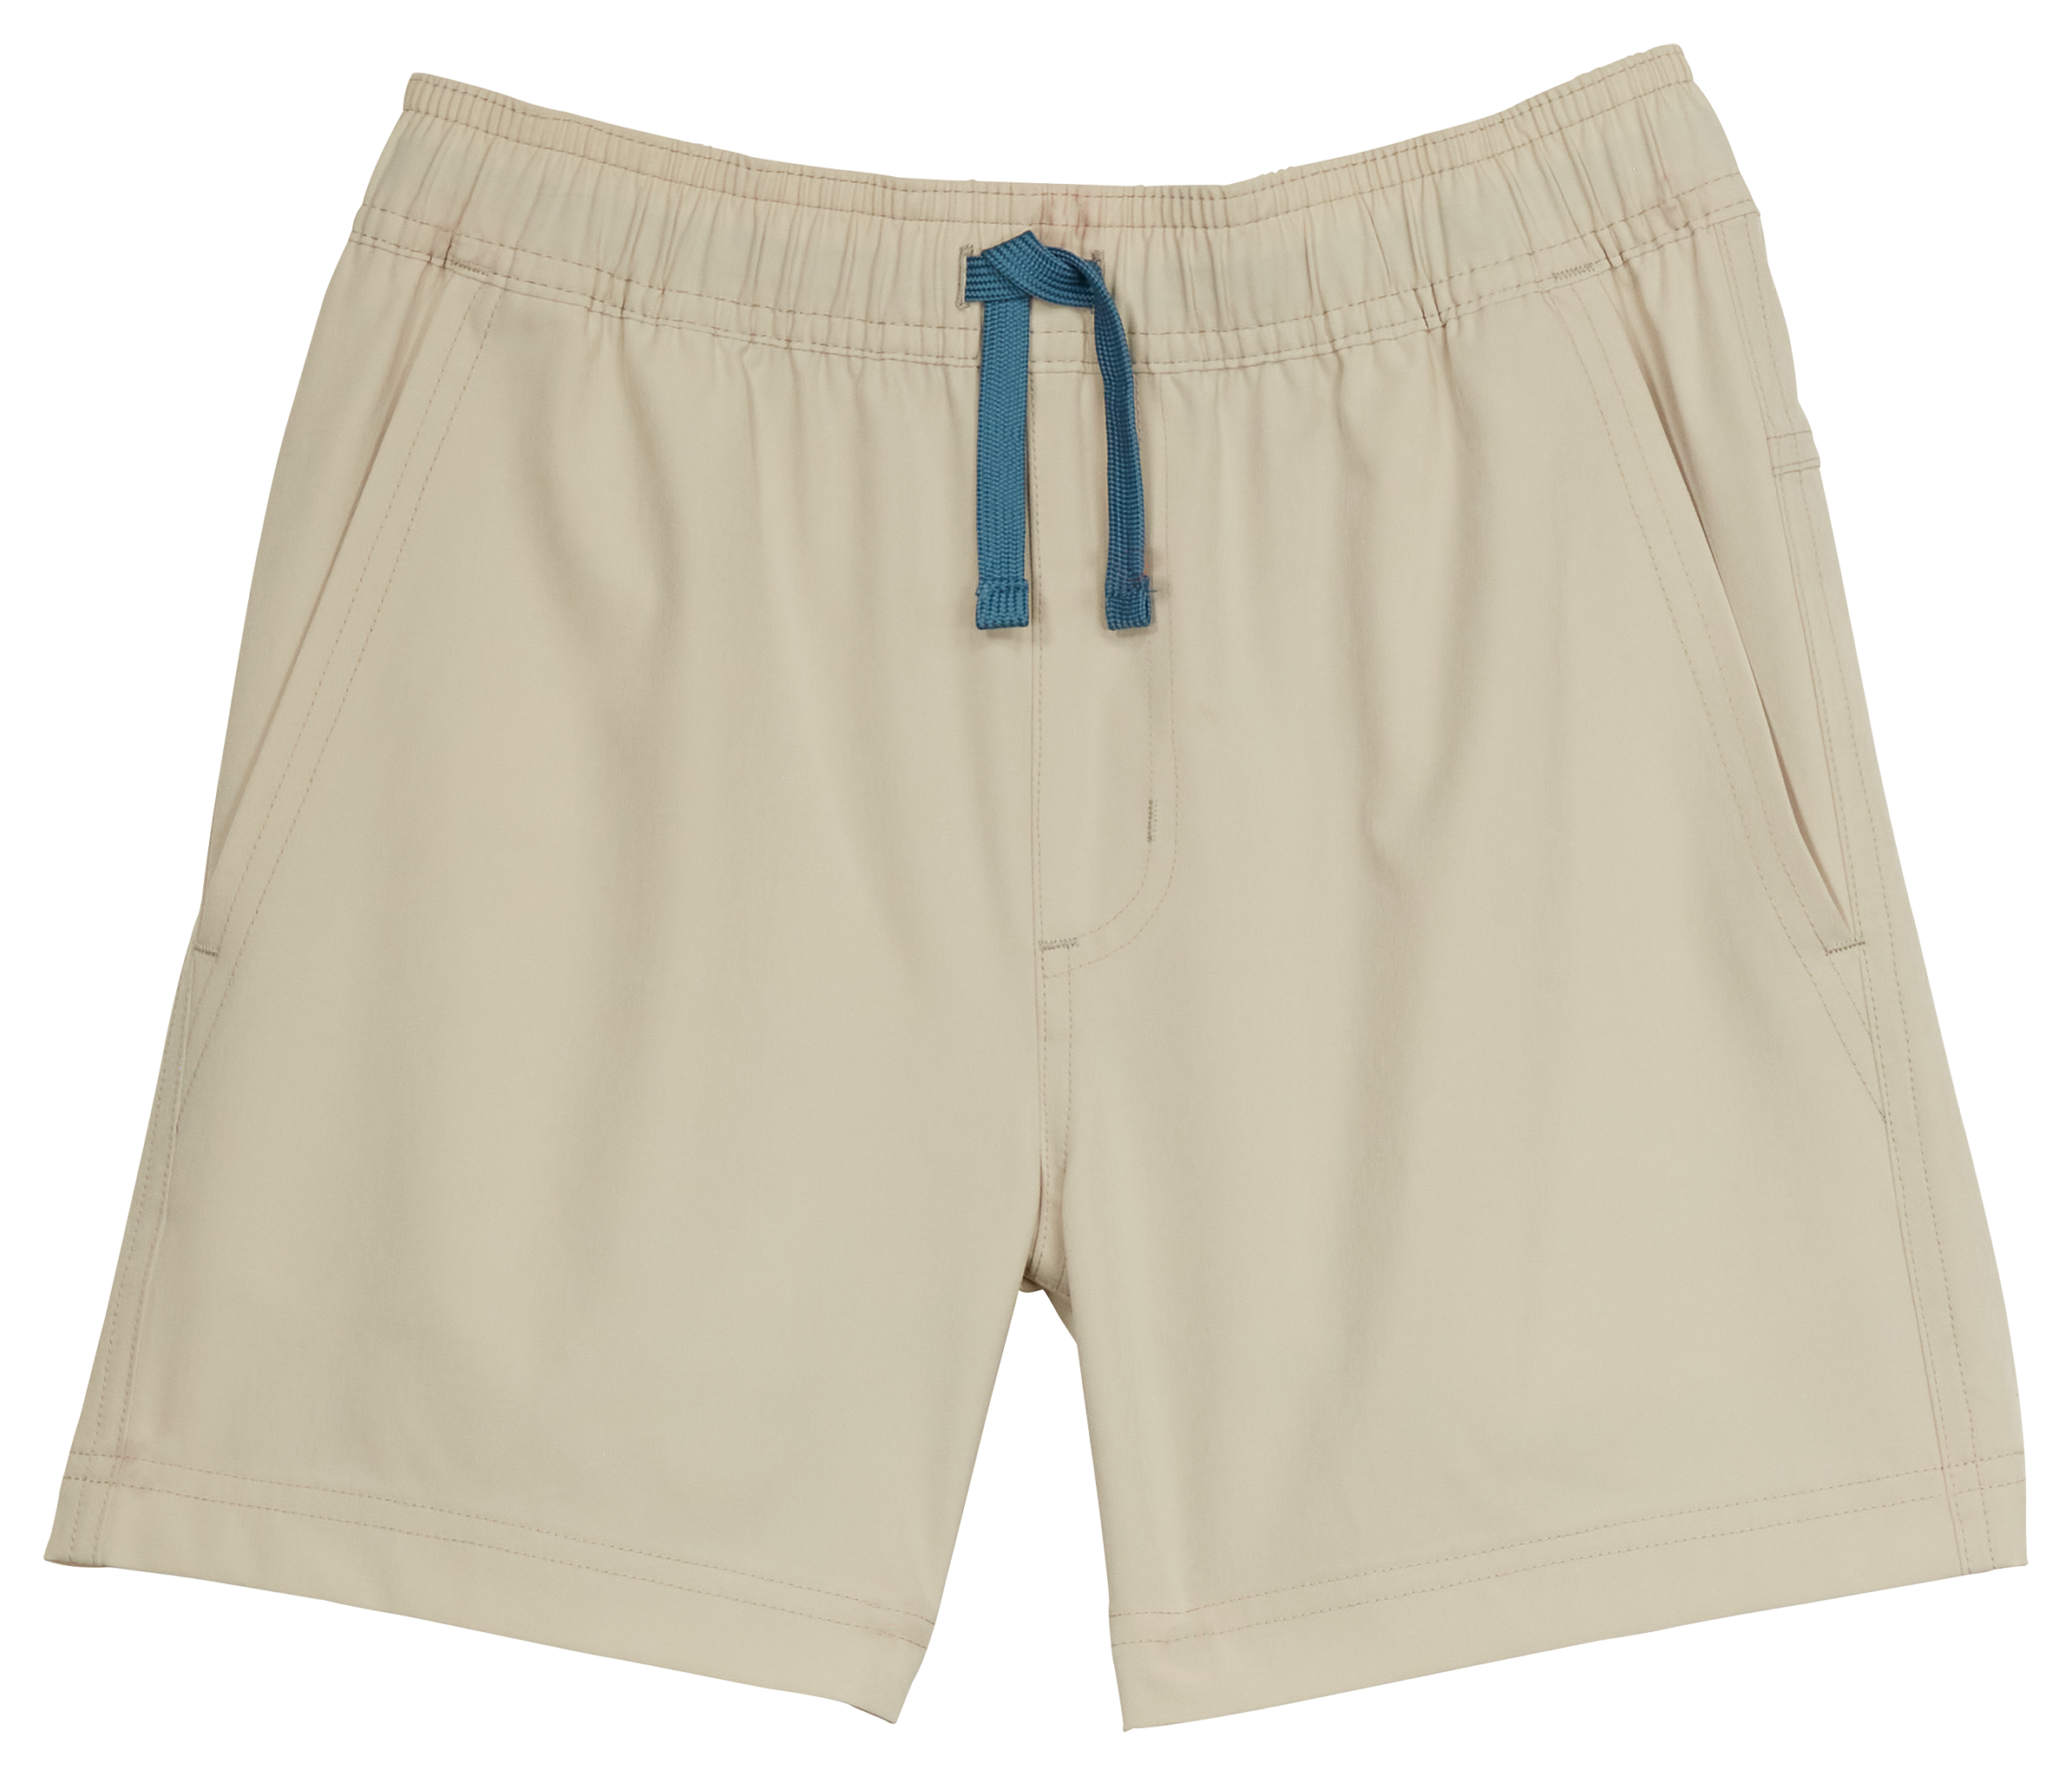 World Wide Sportsman Charter 3-Pocket Pull-On Shorts for Kids - Peyote - XL